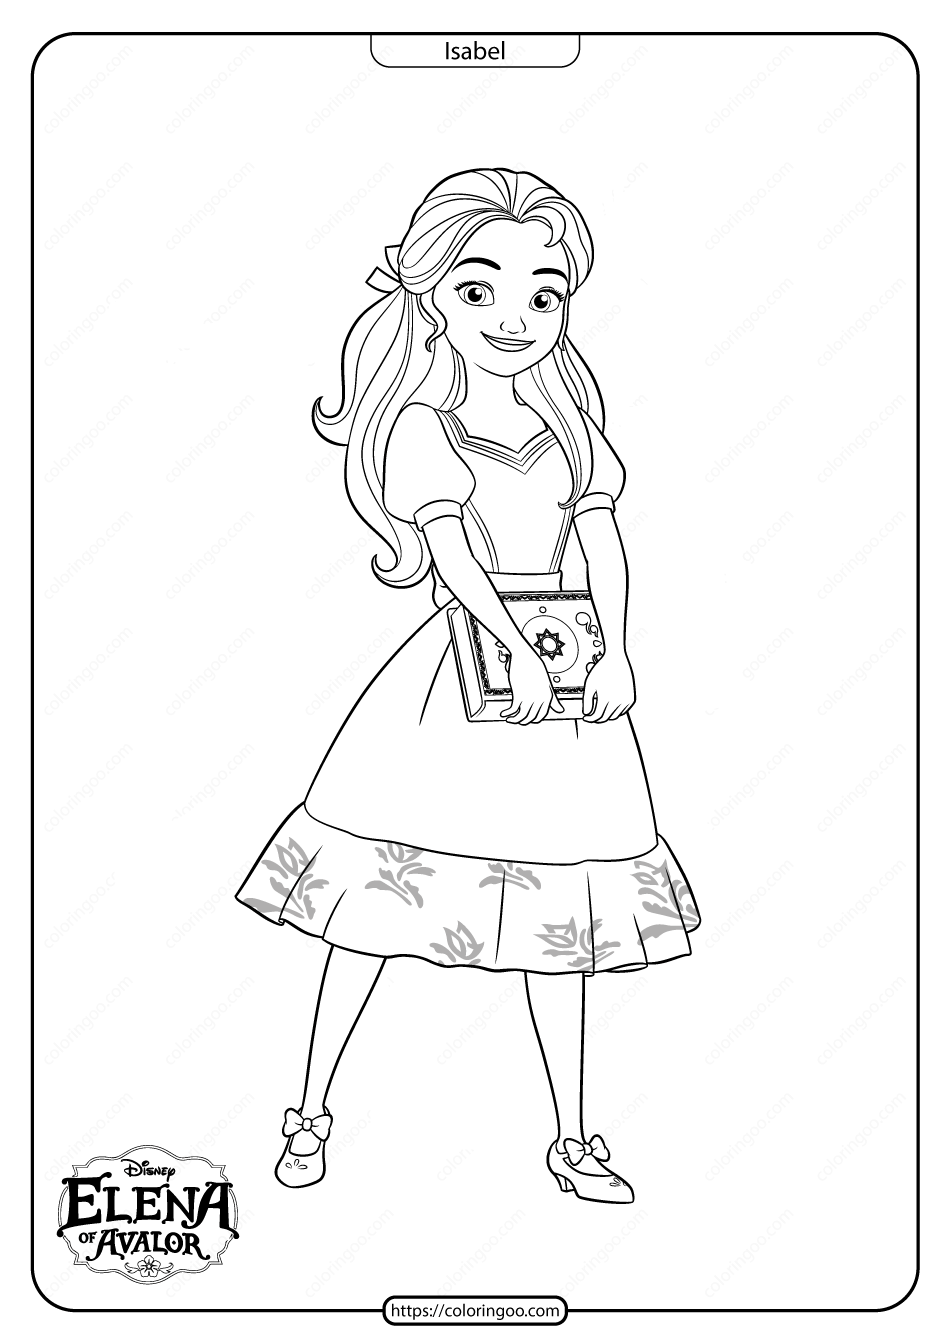 printable elena of avalor isabel coloring pages